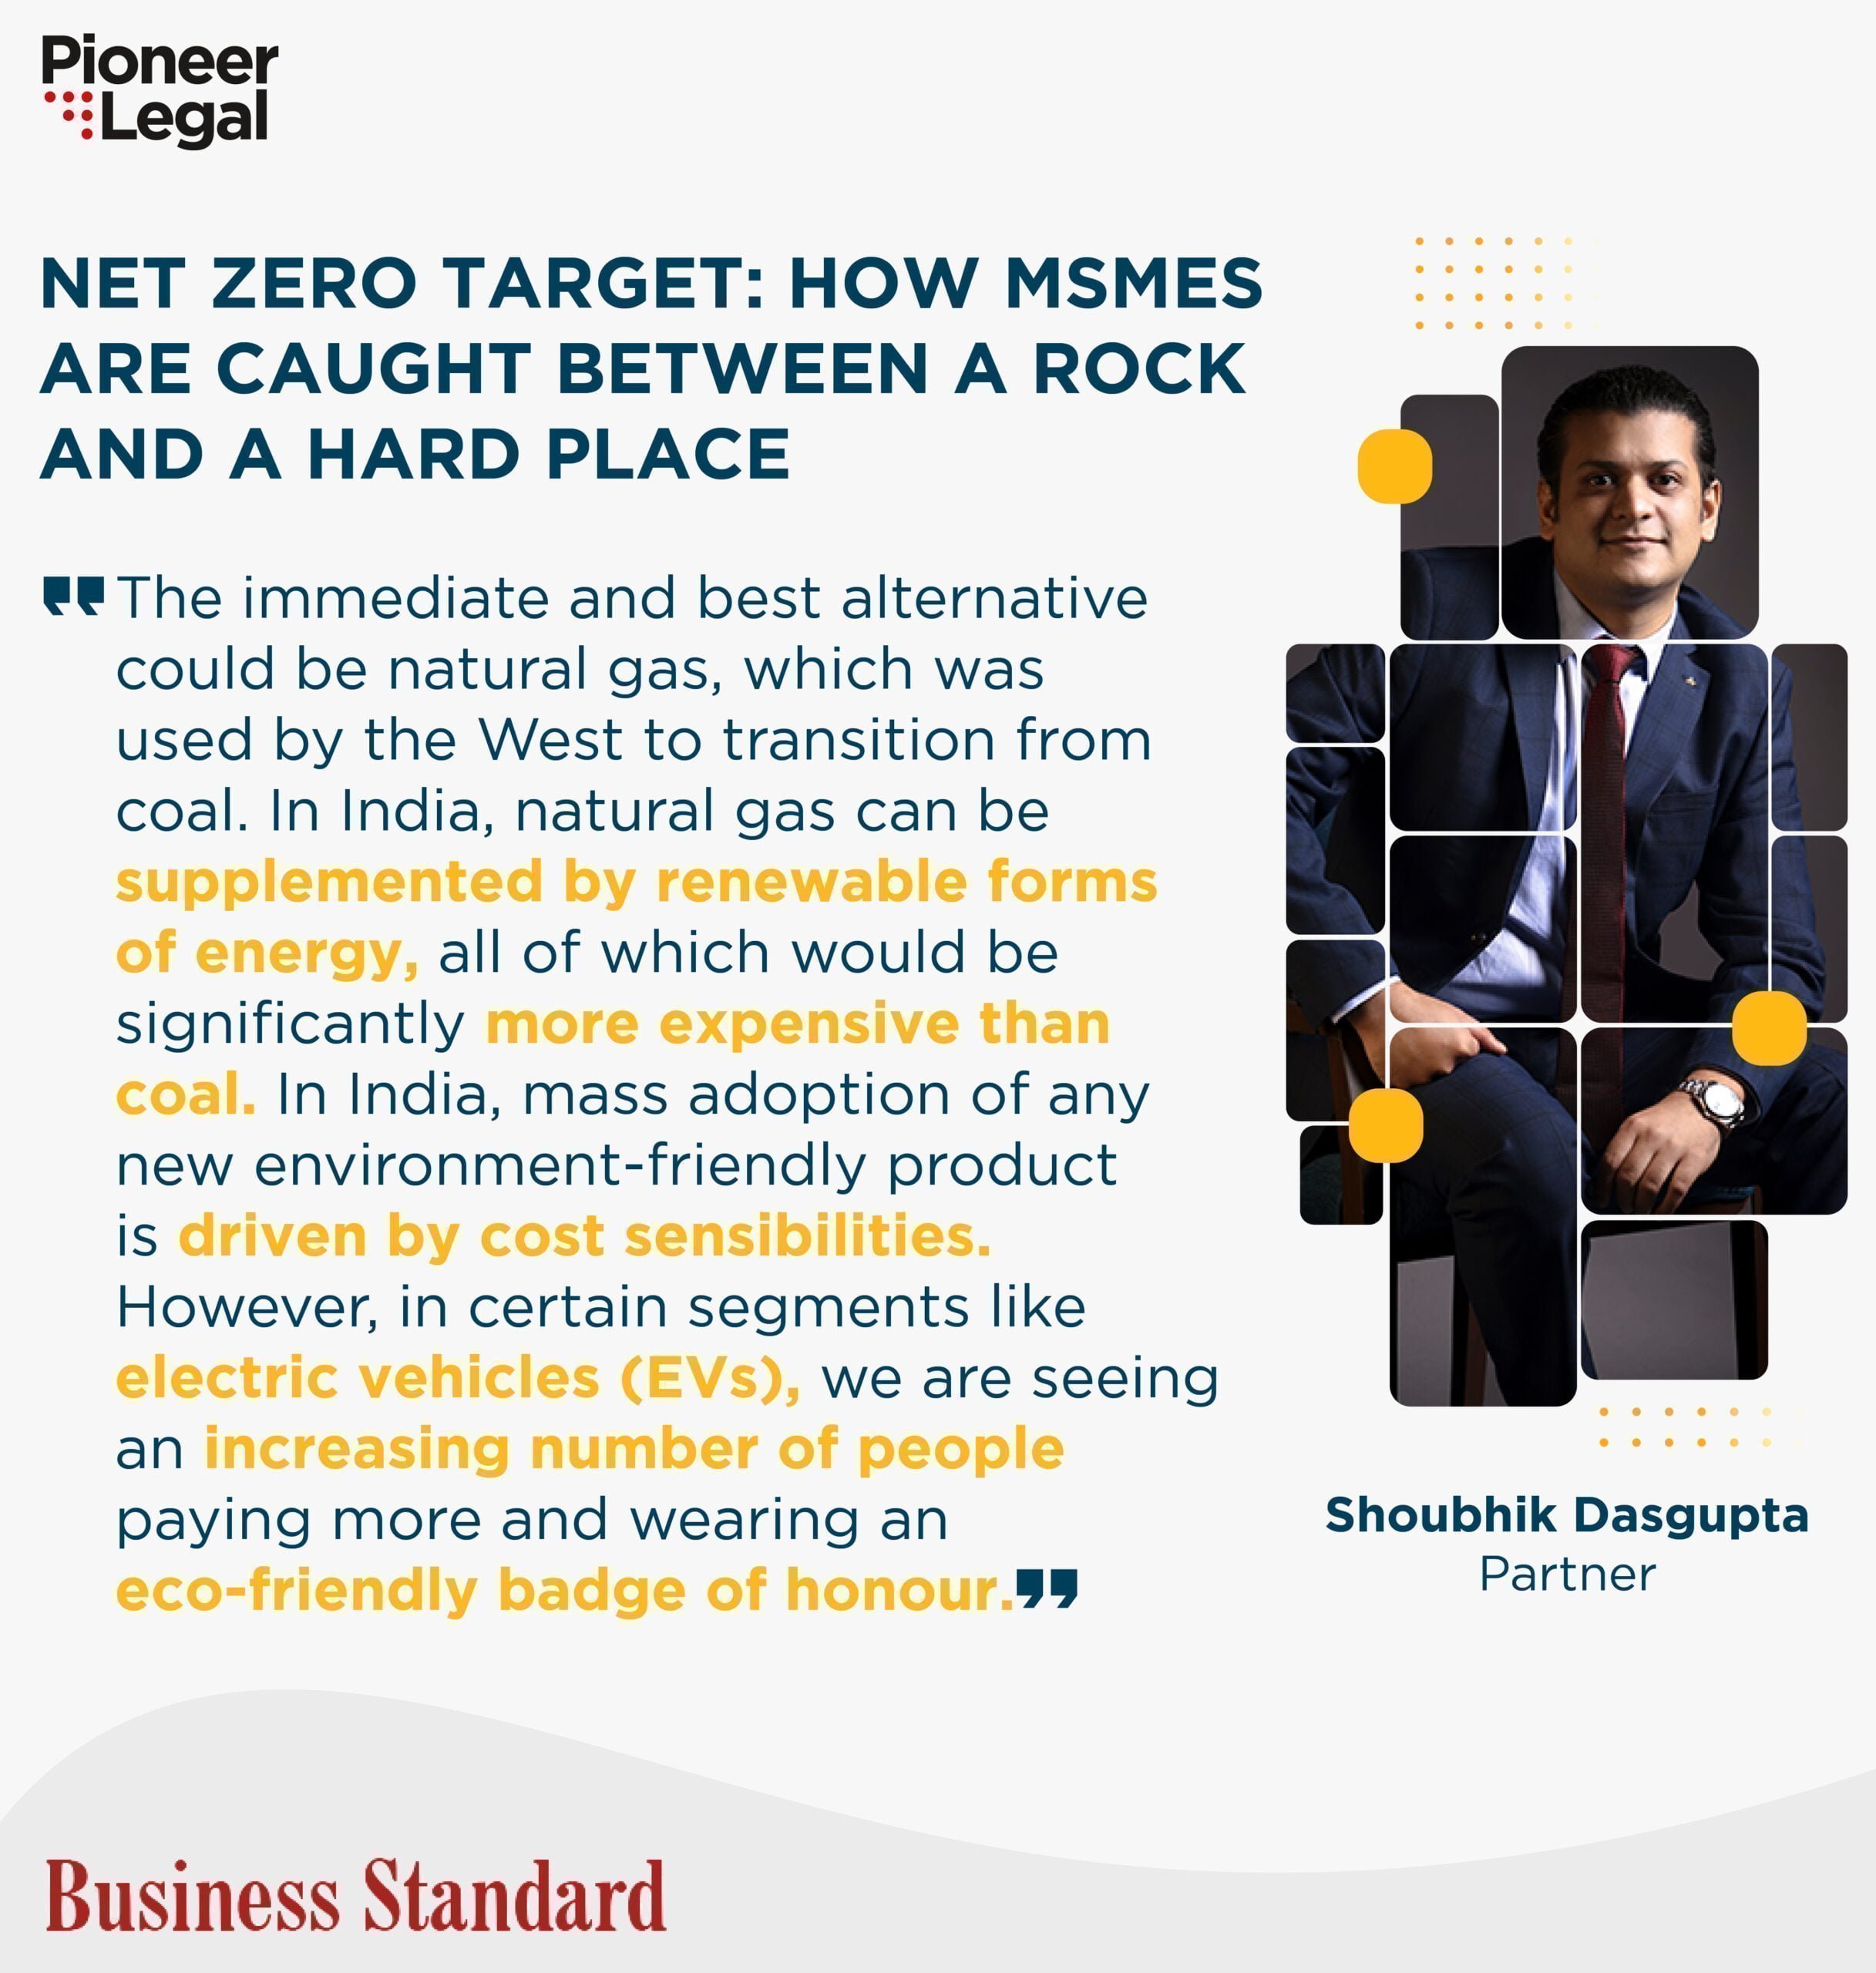 Pioneer Legal - Net Zero Target: How MSMES are caught between a rock and a hard place